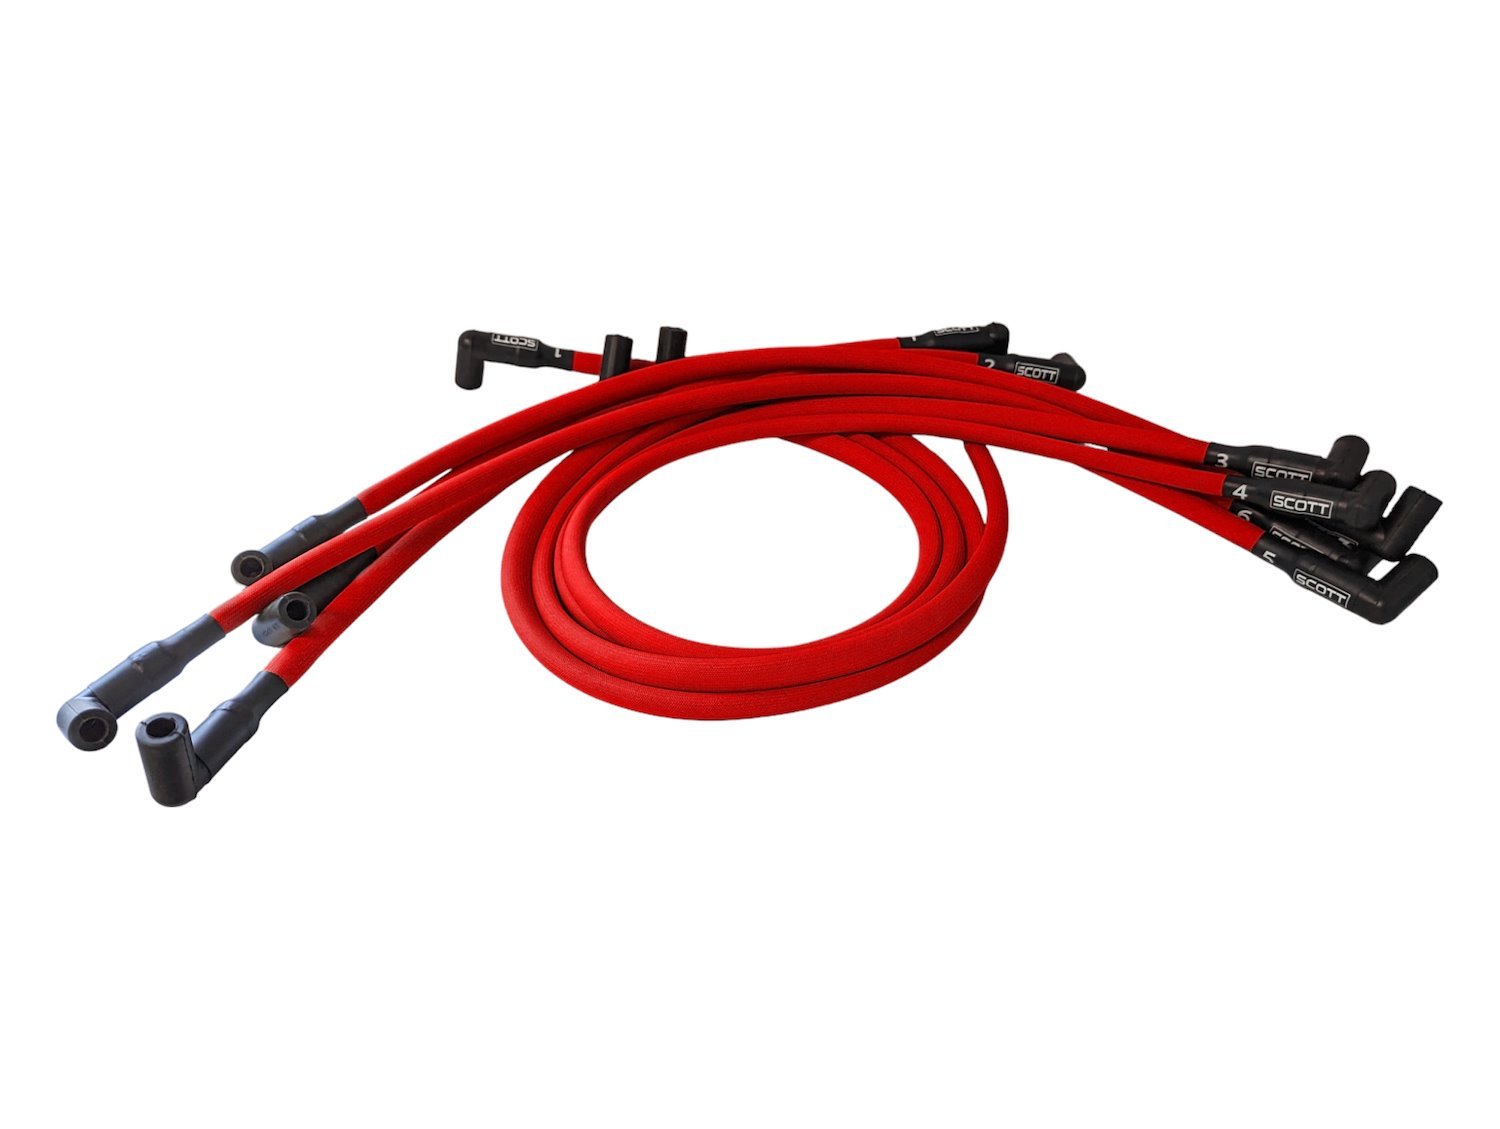 SPW300-PS-516-2 Super Mag Fiberglass-Oversleeved Spark Plug Wire Set for Big Block Chevy Dragster, Under Header [Red]